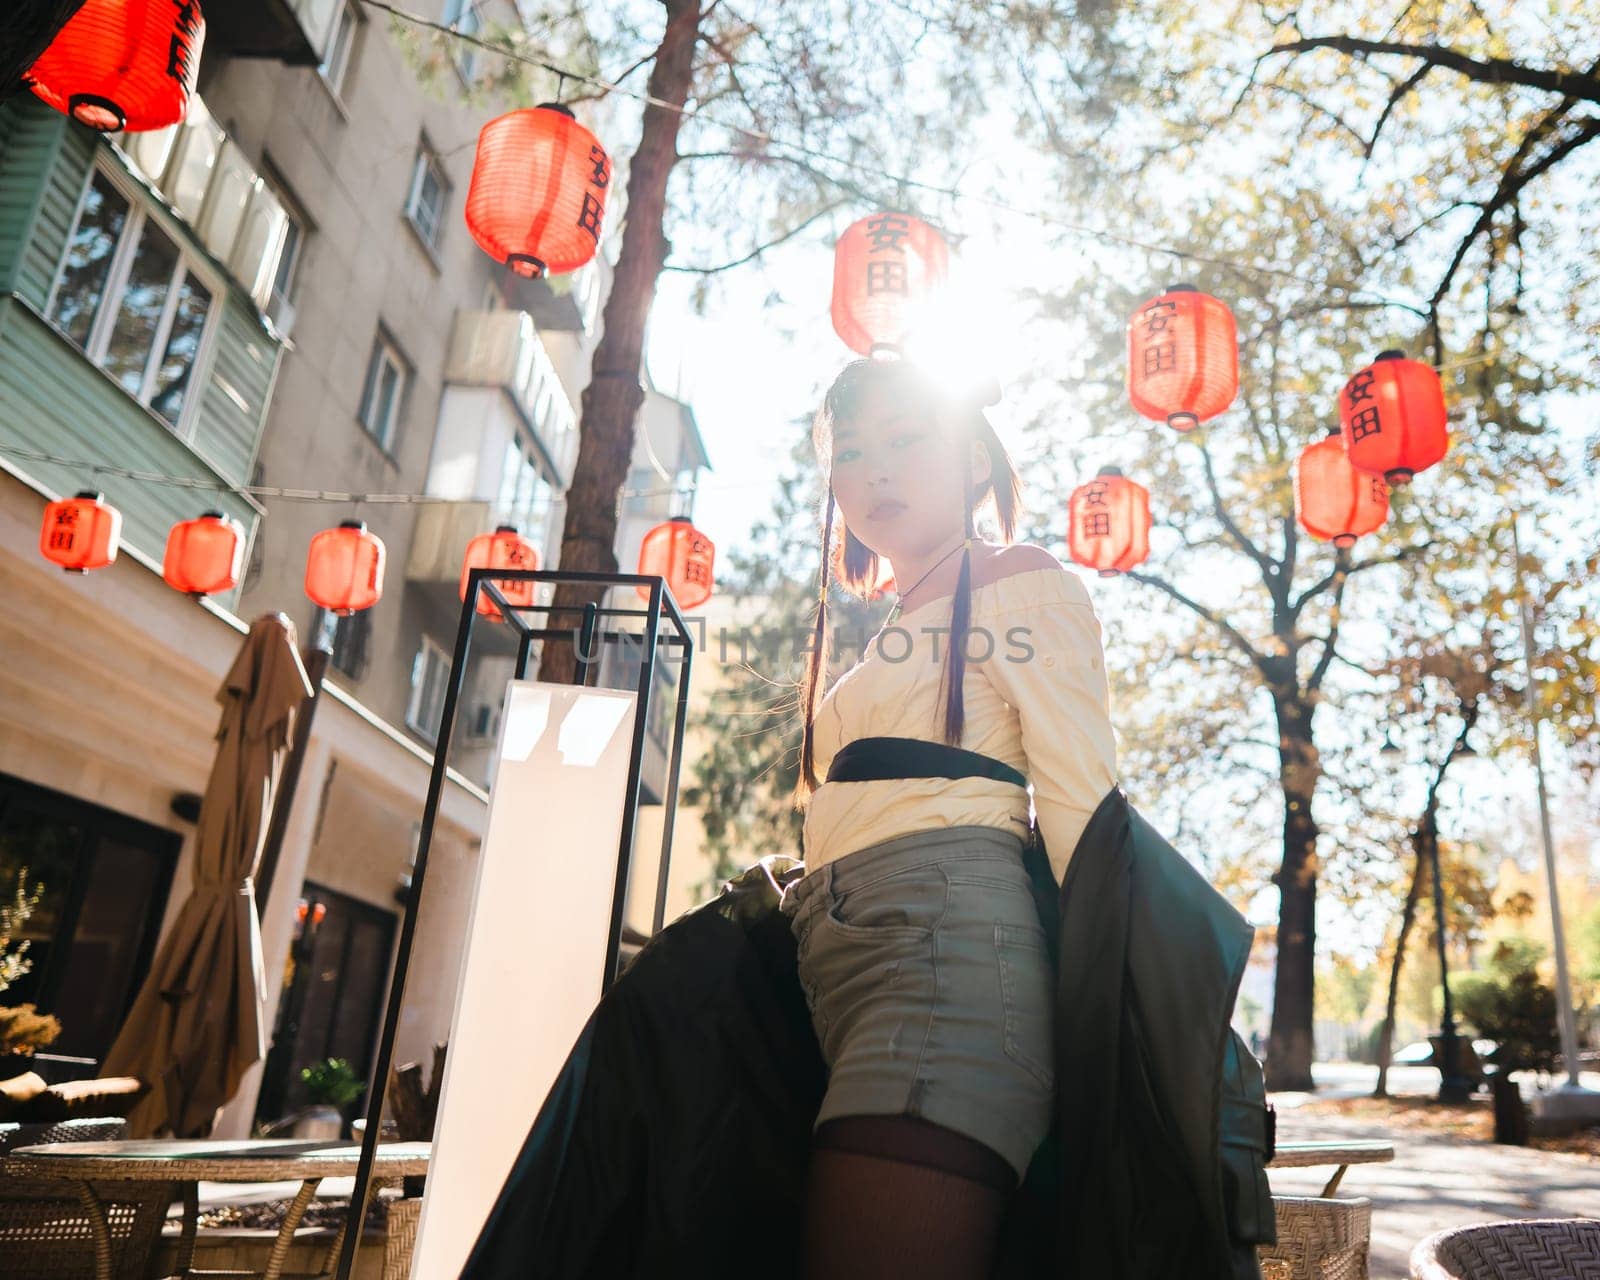 Portrait of an Asian woman against the background of Chinese lanterns outdoors